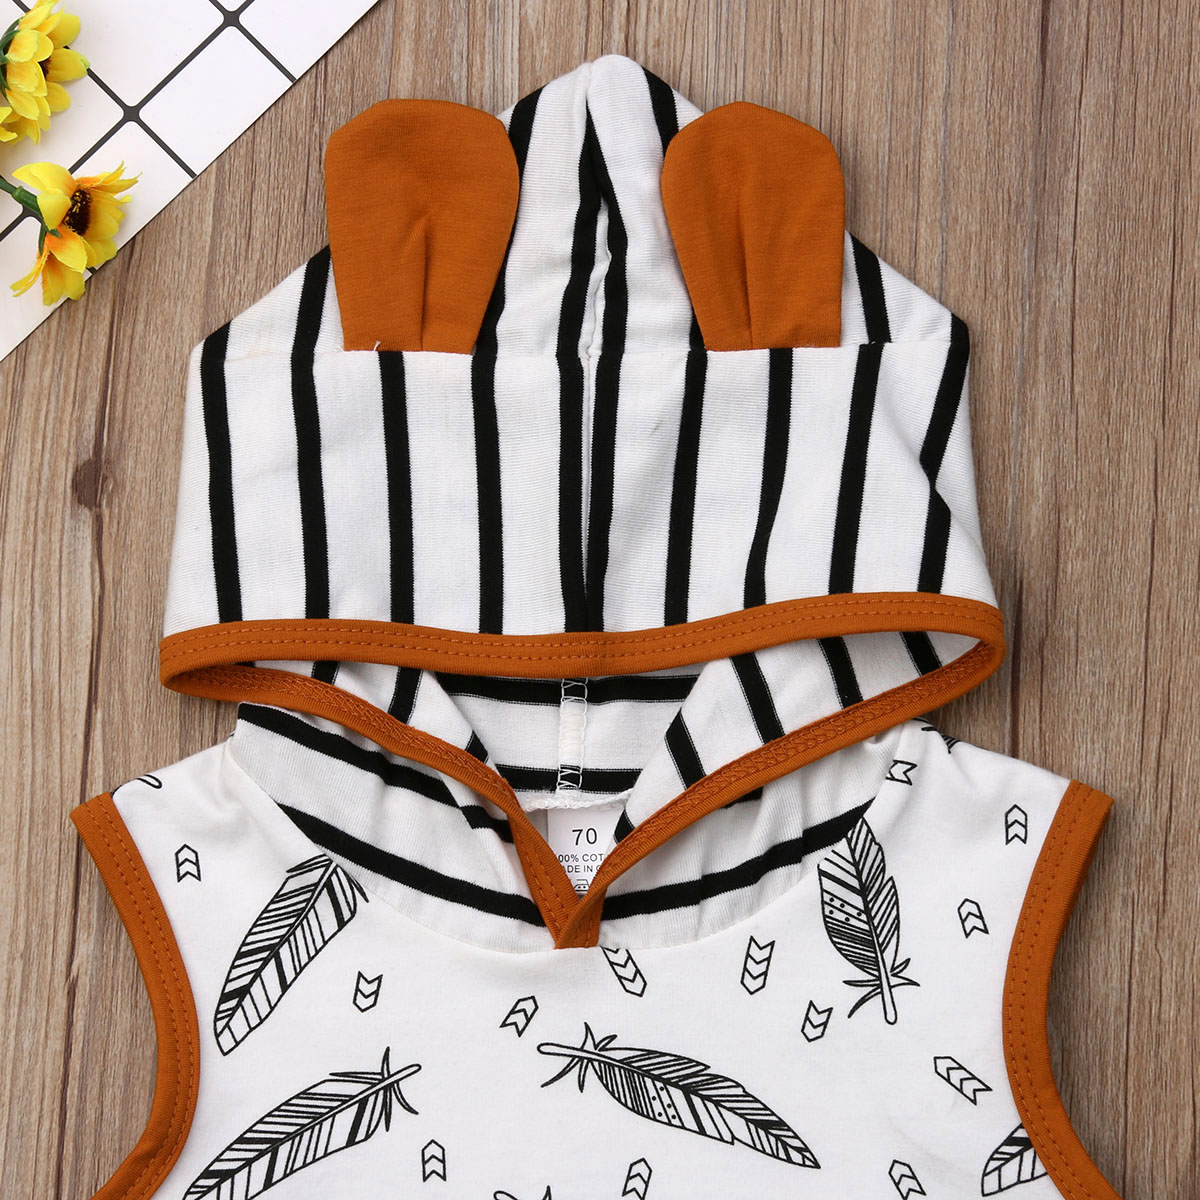 New Arrivels 2pcs Set Toddler Baby Boy Girl Feather Hooded T-shirt Tops+Stripe Shorts Pants Outfits Summer Clothes